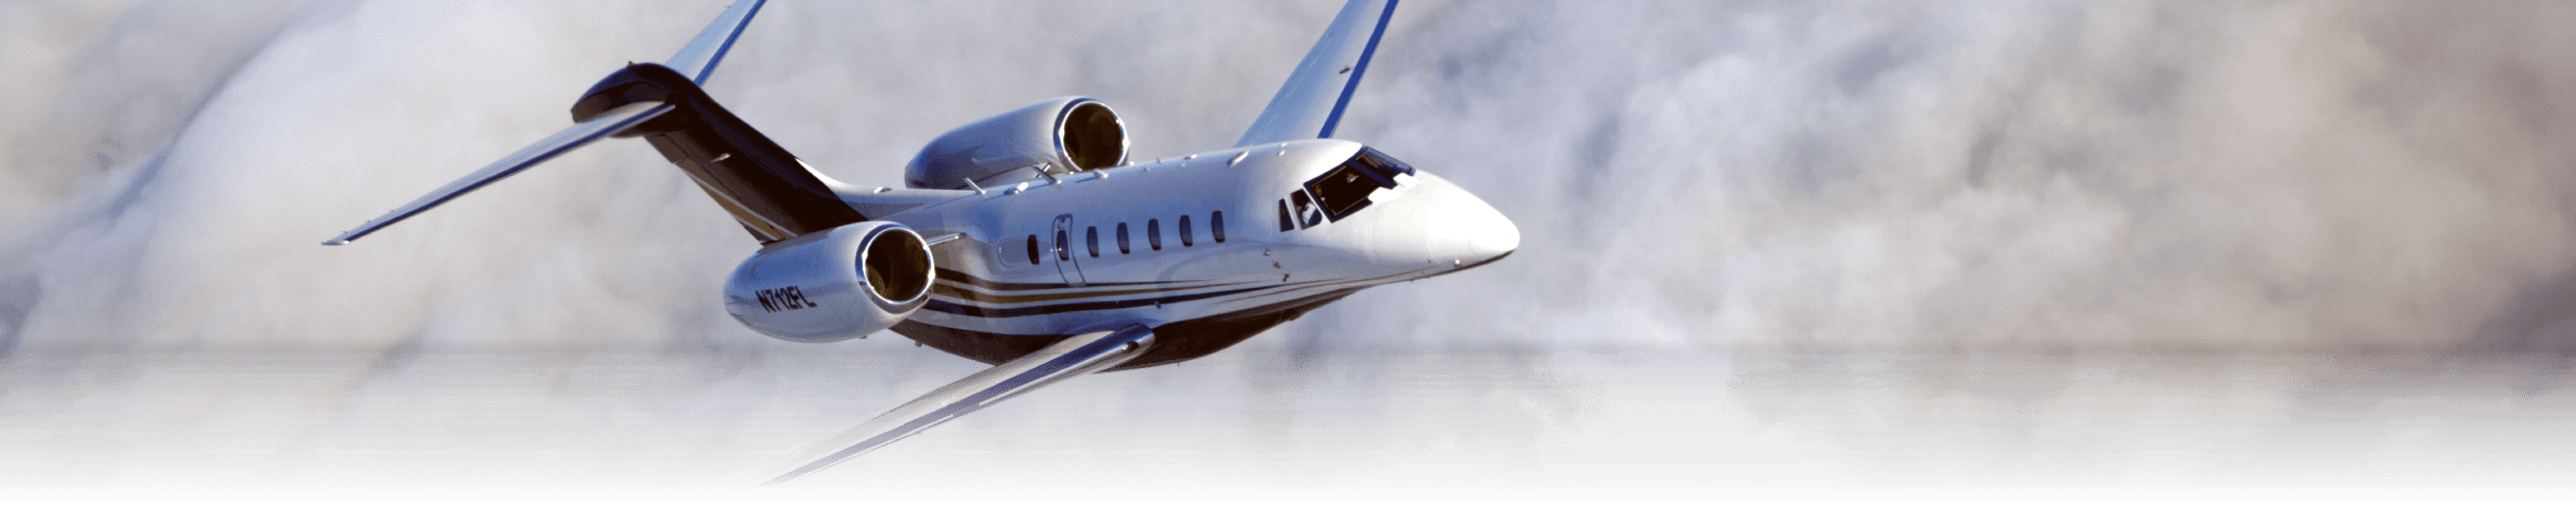 Flight Options Private Jet Aviation Frequently Asked Questions (FAQs)